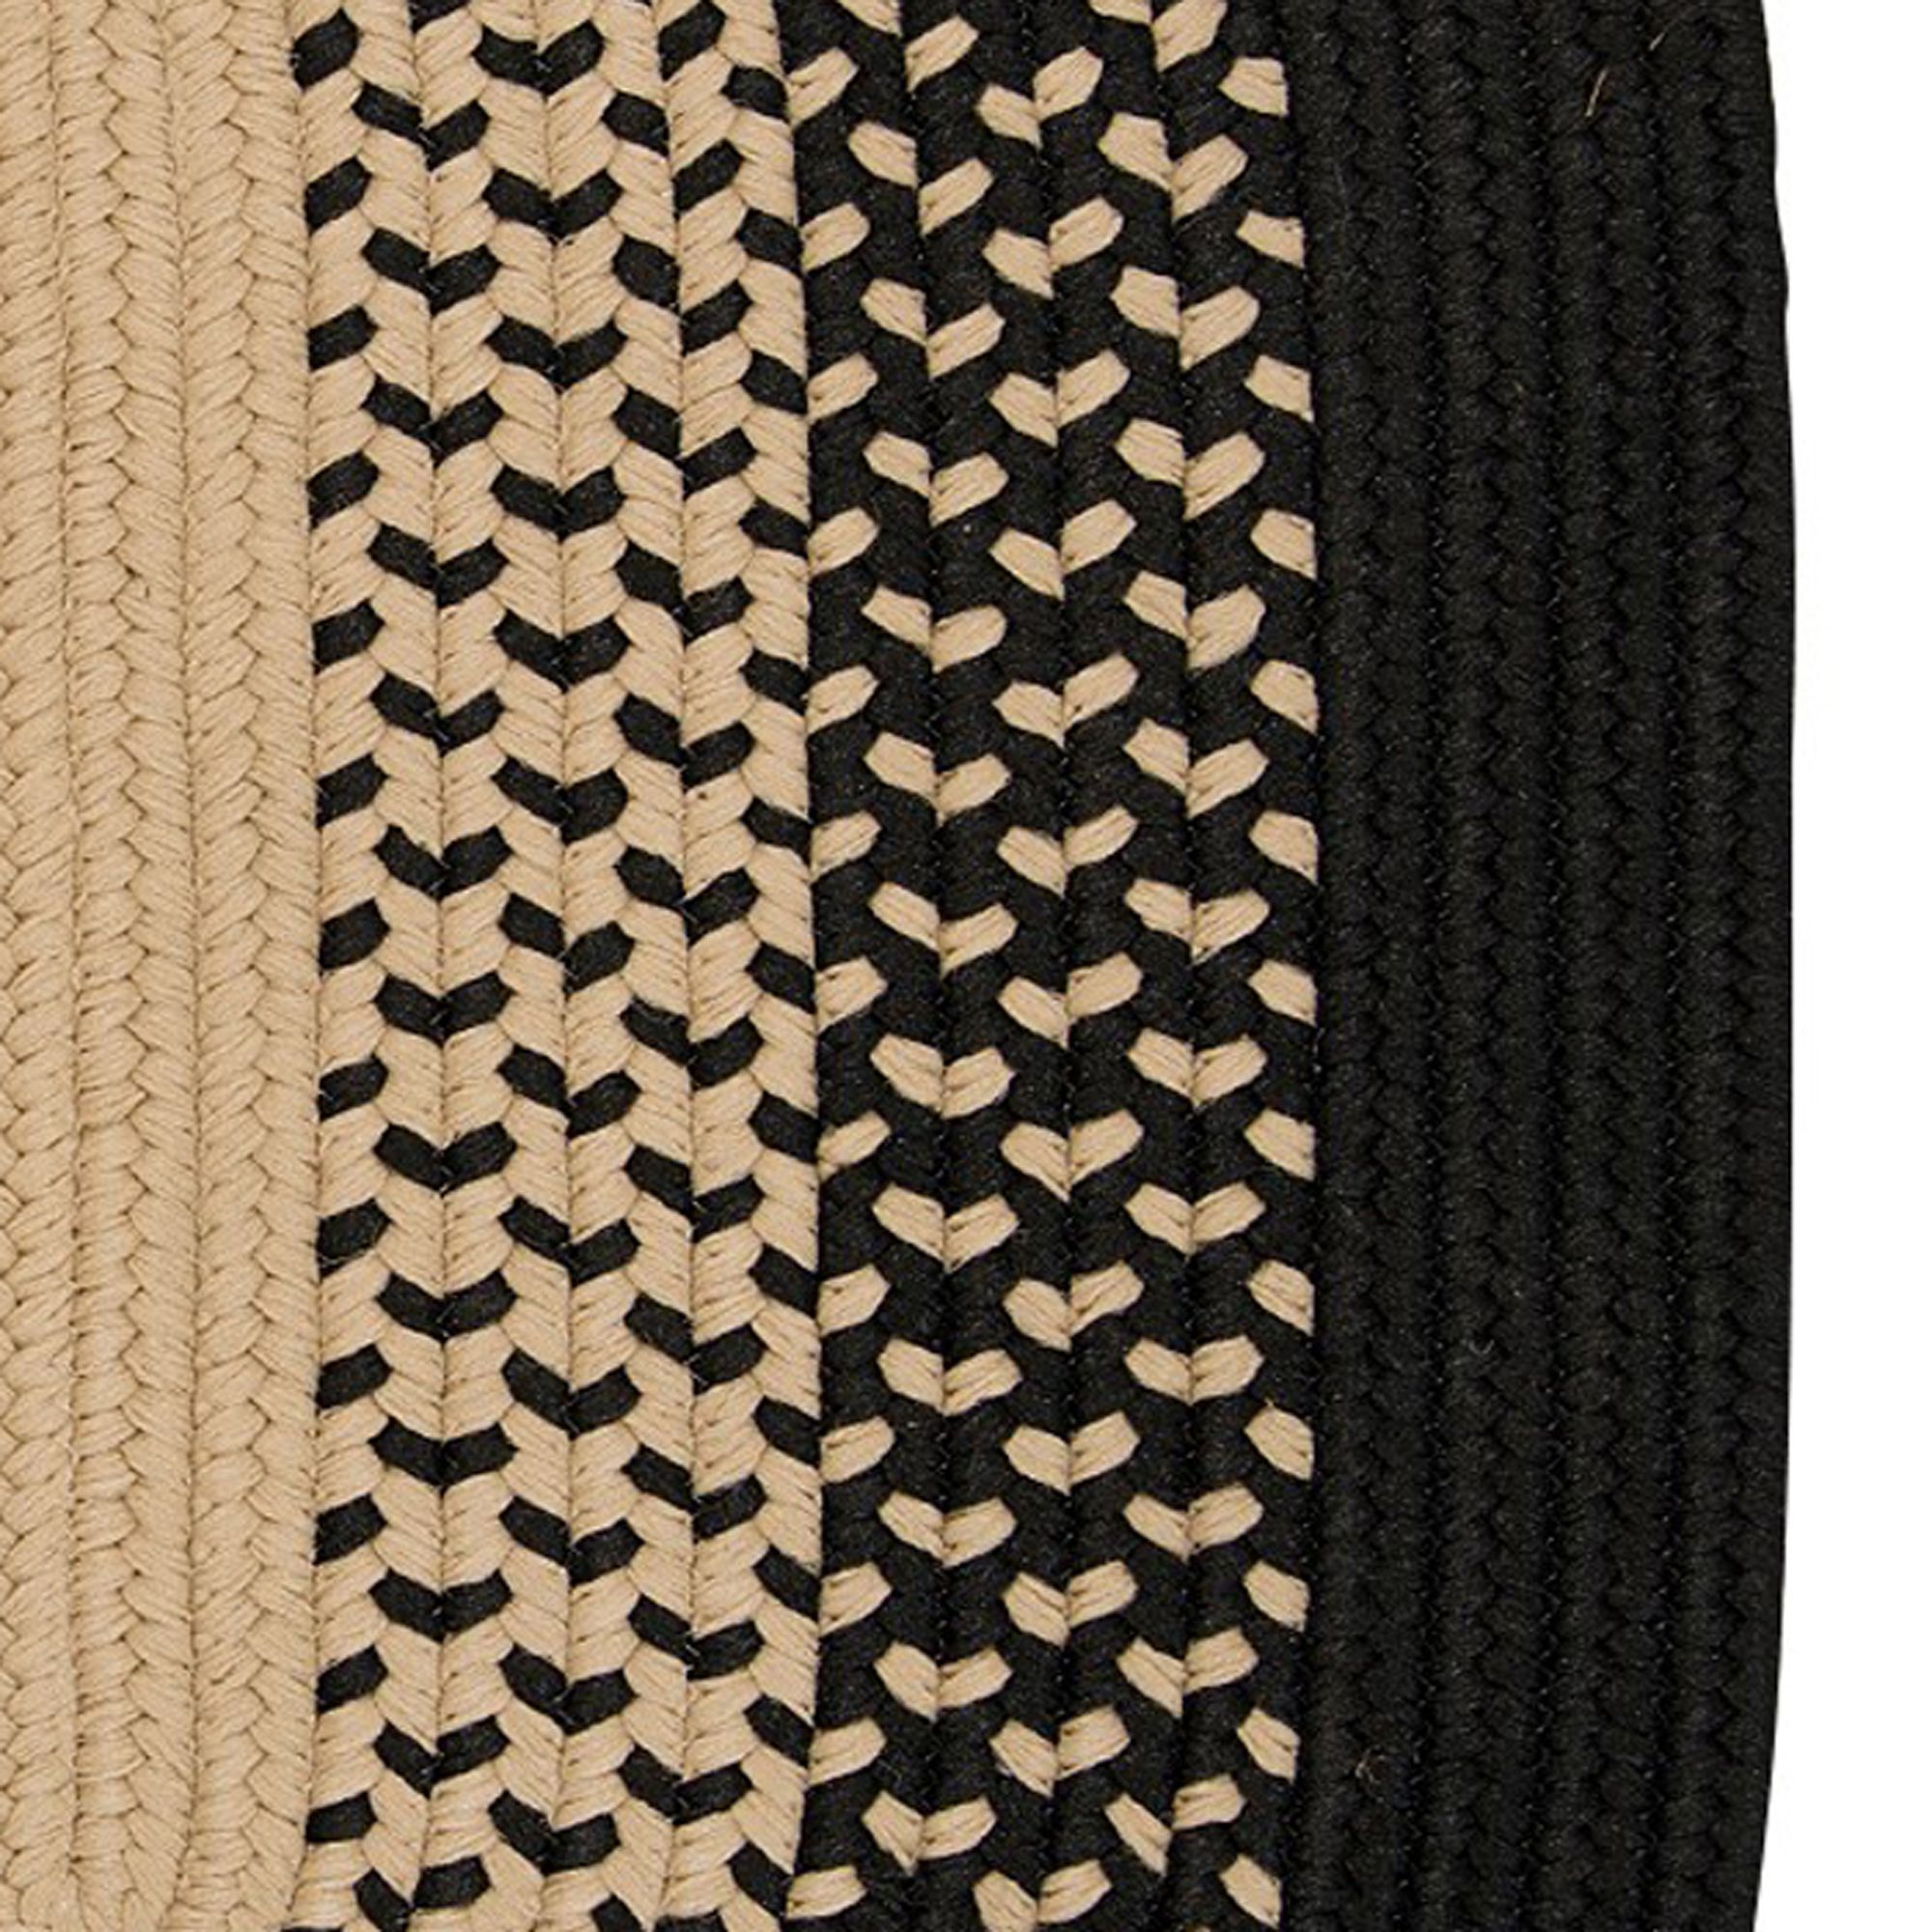 Colonial Mills 2.25' x 3.8' Beige and Black All Purpose Handcrafted Reversible Oval Outdoor Area Throw Rug